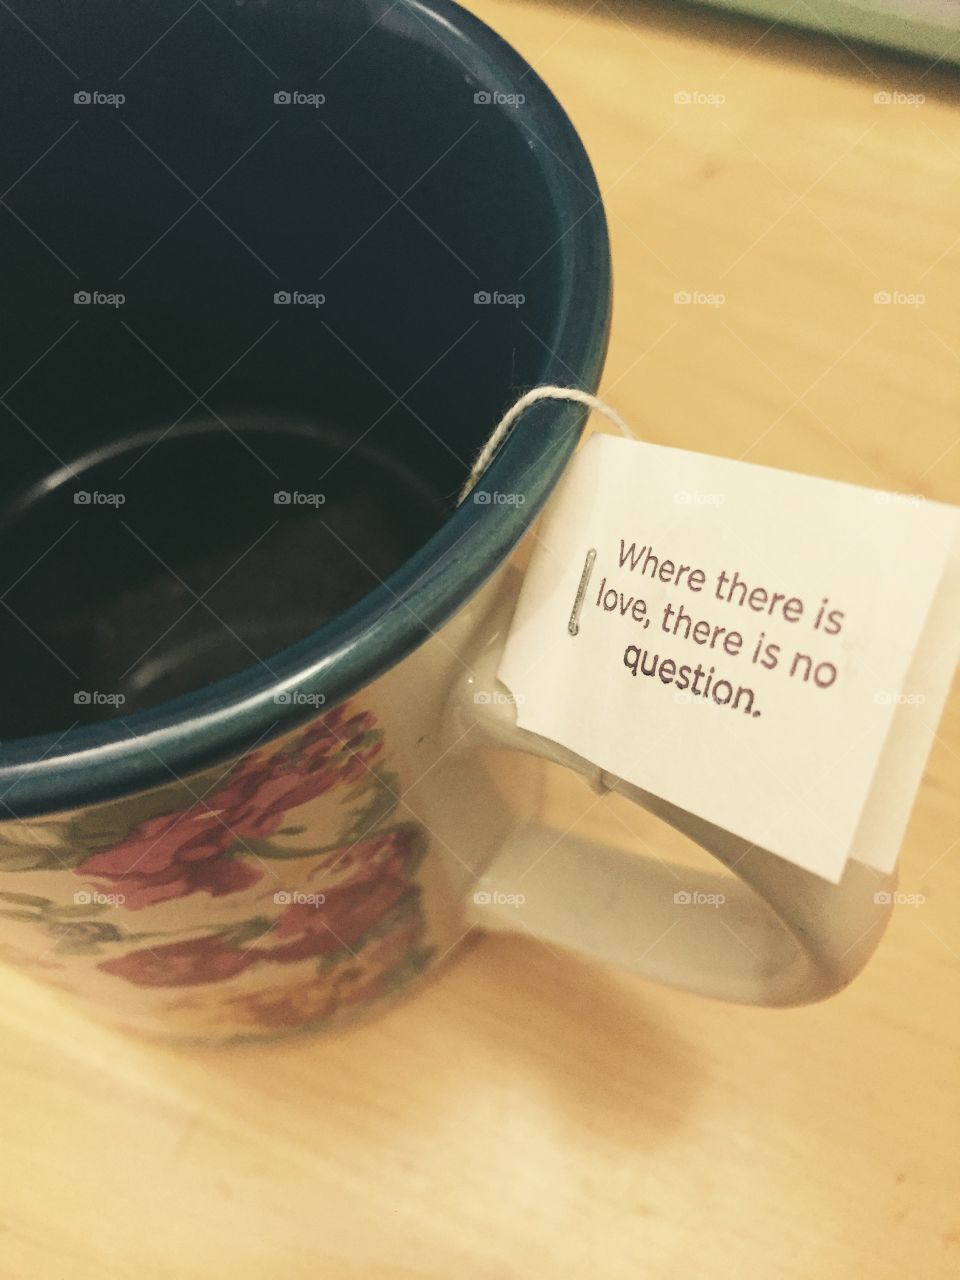 Yogi Tea. Where there is love, there is no question.